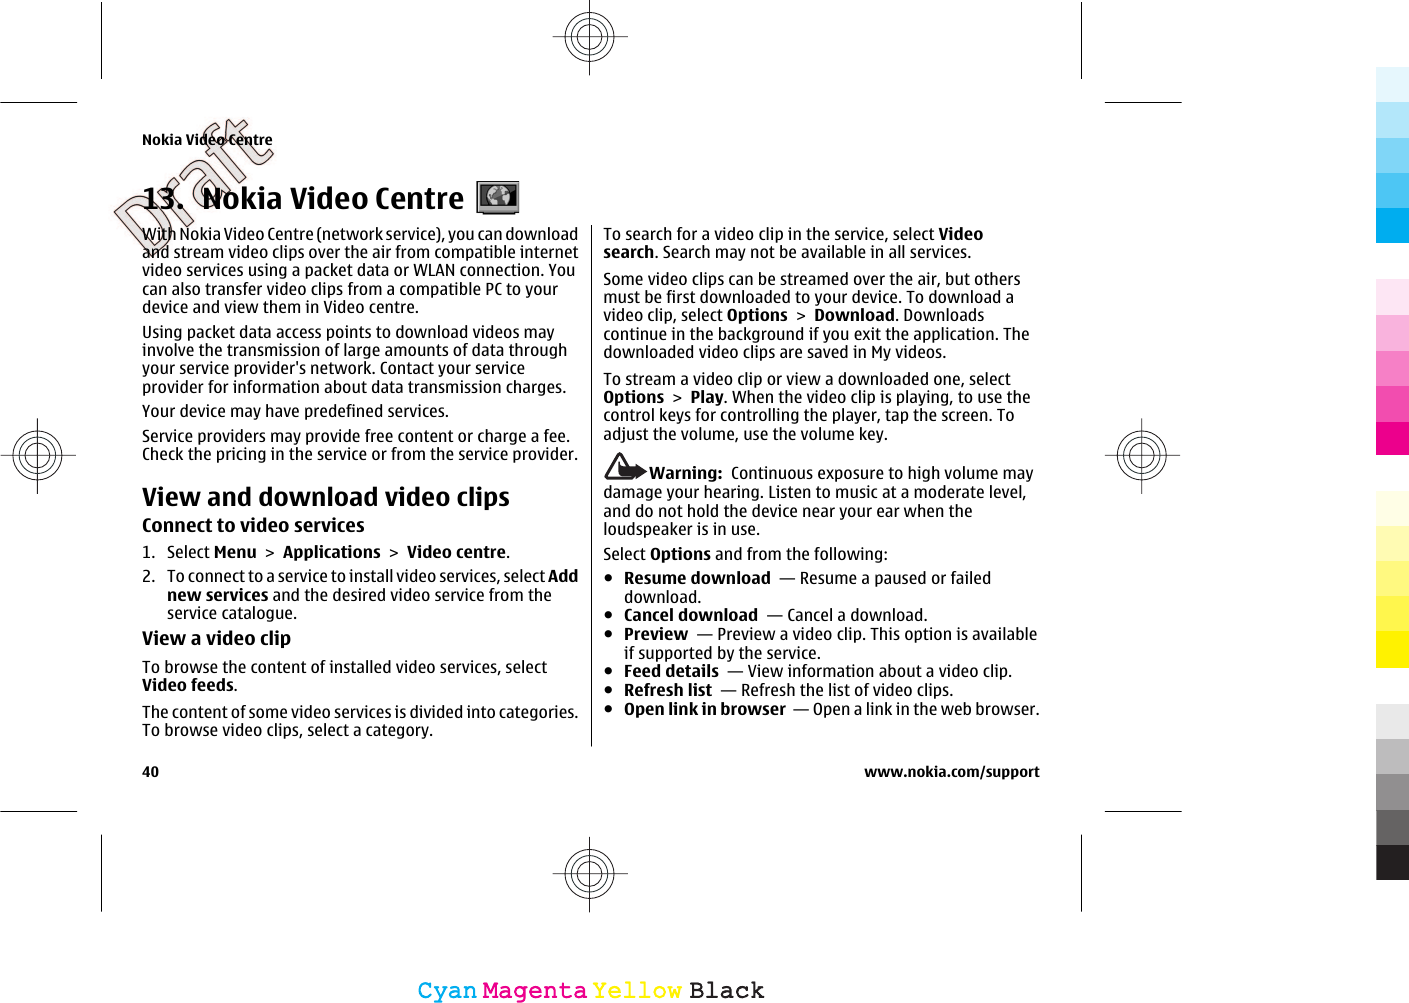 13. Nokia Video CentreWith Nokia Video Centre (network service), you can downloadand stream video clips over the air from compatible internetvideo services using a packet data or WLAN connection. Youcan also transfer video clips from a compatible PC to yourdevice and view them in Video centre.Using packet data access points to download videos mayinvolve the transmission of large amounts of data throughyour service provider&apos;s network. Contact your serviceprovider for information about data transmission charges.Your device may have predefined services.Service providers may provide free content or charge a fee.Check the pricing in the service or from the service provider.View and download video clipsConnect to video services1. Select Menu &gt; Applications &gt; Video centre.2. To connect to a service to install video services, select Addnew services and the desired video service from theservice catalogue.View a video clipTo browse the content of installed video services, selectVideo feeds.The content of some video services is divided into categories.To browse video clips, select a category.To search for a video clip in the service, select Videosearch. Search may not be available in all services.Some video clips can be streamed over the air, but othersmust be first downloaded to your device. To download avideo clip, select Options &gt; Download. Downloadscontinue in the background if you exit the application. Thedownloaded video clips are saved in My videos.To stream a video clip or view a downloaded one, selectOptions &gt; Play. When the video clip is playing, to use thecontrol keys for controlling the player, tap the screen. Toadjust the volume, use the volume key.Warning:  Continuous exposure to high volume maydamage your hearing. Listen to music at a moderate level,and do not hold the device near your ear when theloudspeaker is in use.Select Options and from the following:●Resume download  — Resume a paused or faileddownload.●Cancel download  — Cancel a download.●Preview  — Preview a video clip. This option is availableif supported by the service.●Feed details  — View information about a video clip.●Refresh list  — Refresh the list of video clips.●Open link in browser  — Open a link in the web browser.Nokia Video Centre40 www.nokia.com/supportCyanCyanMagentaMagentaYellowYellowBlackBlack